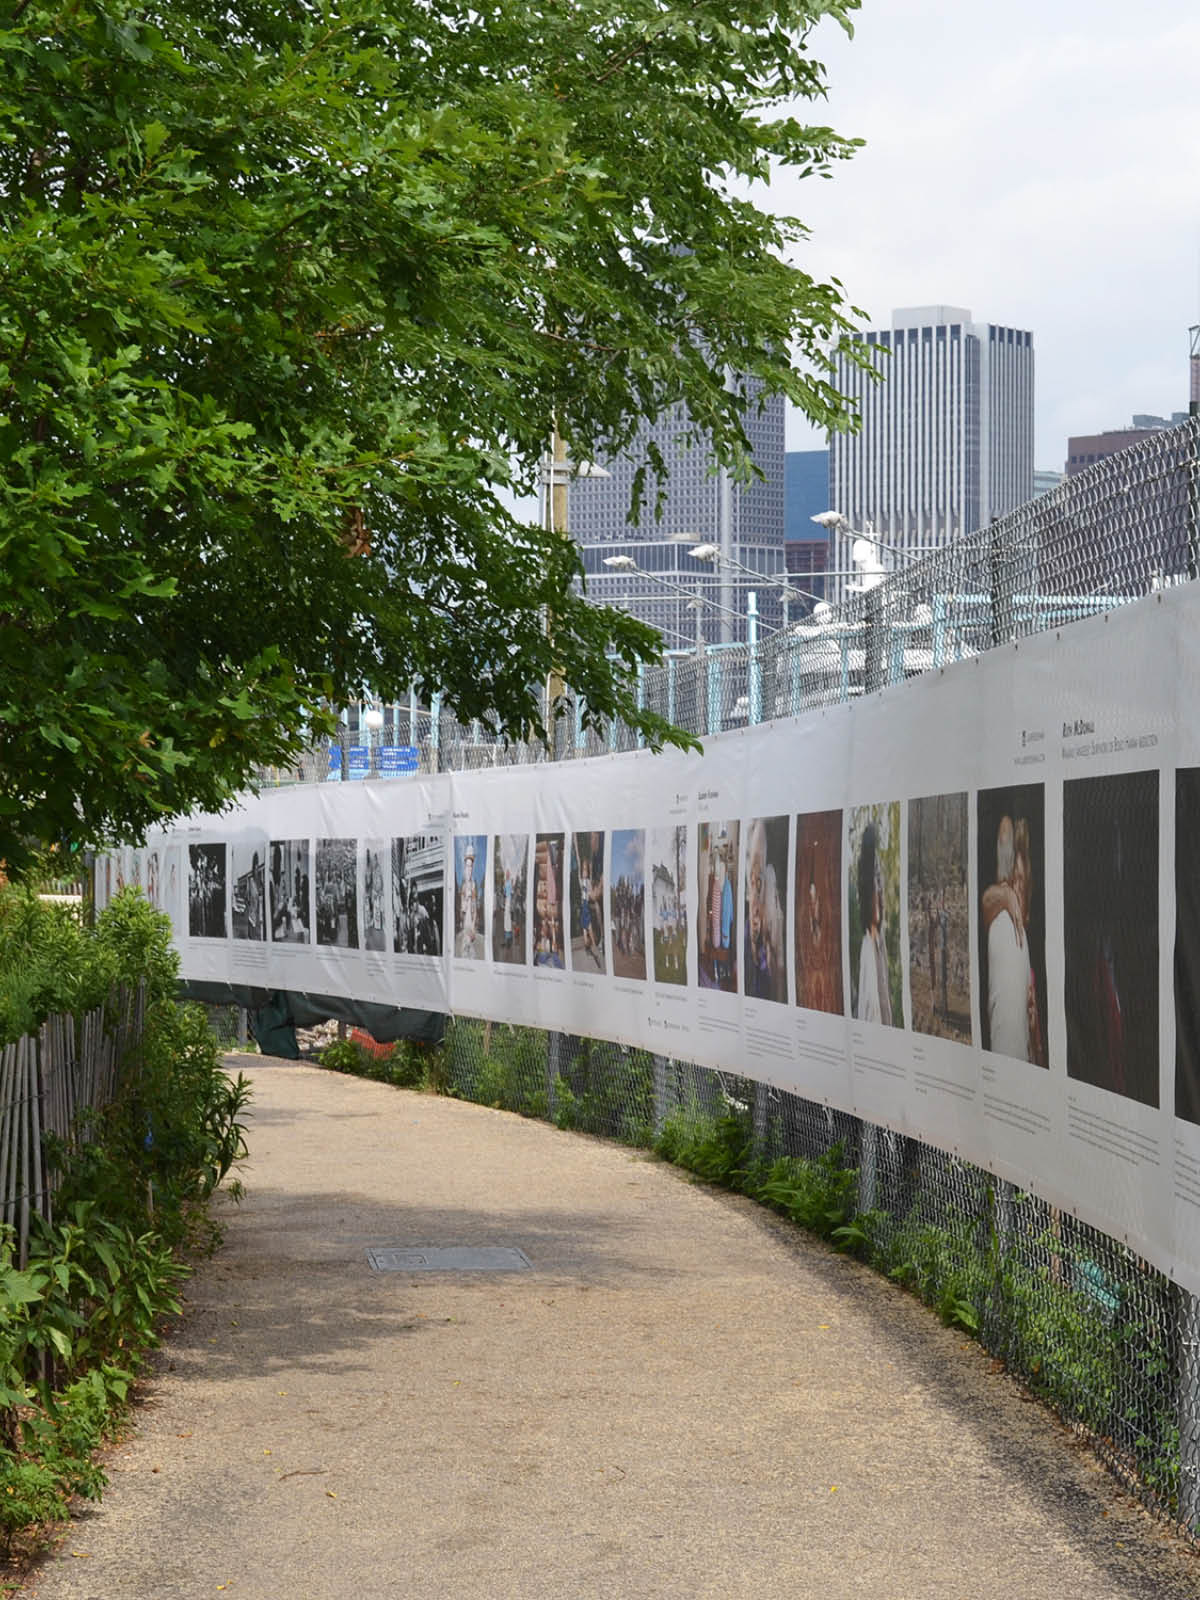 A long photo banner pinned to a chainlink fence along a pathway as part of THE FENCE.